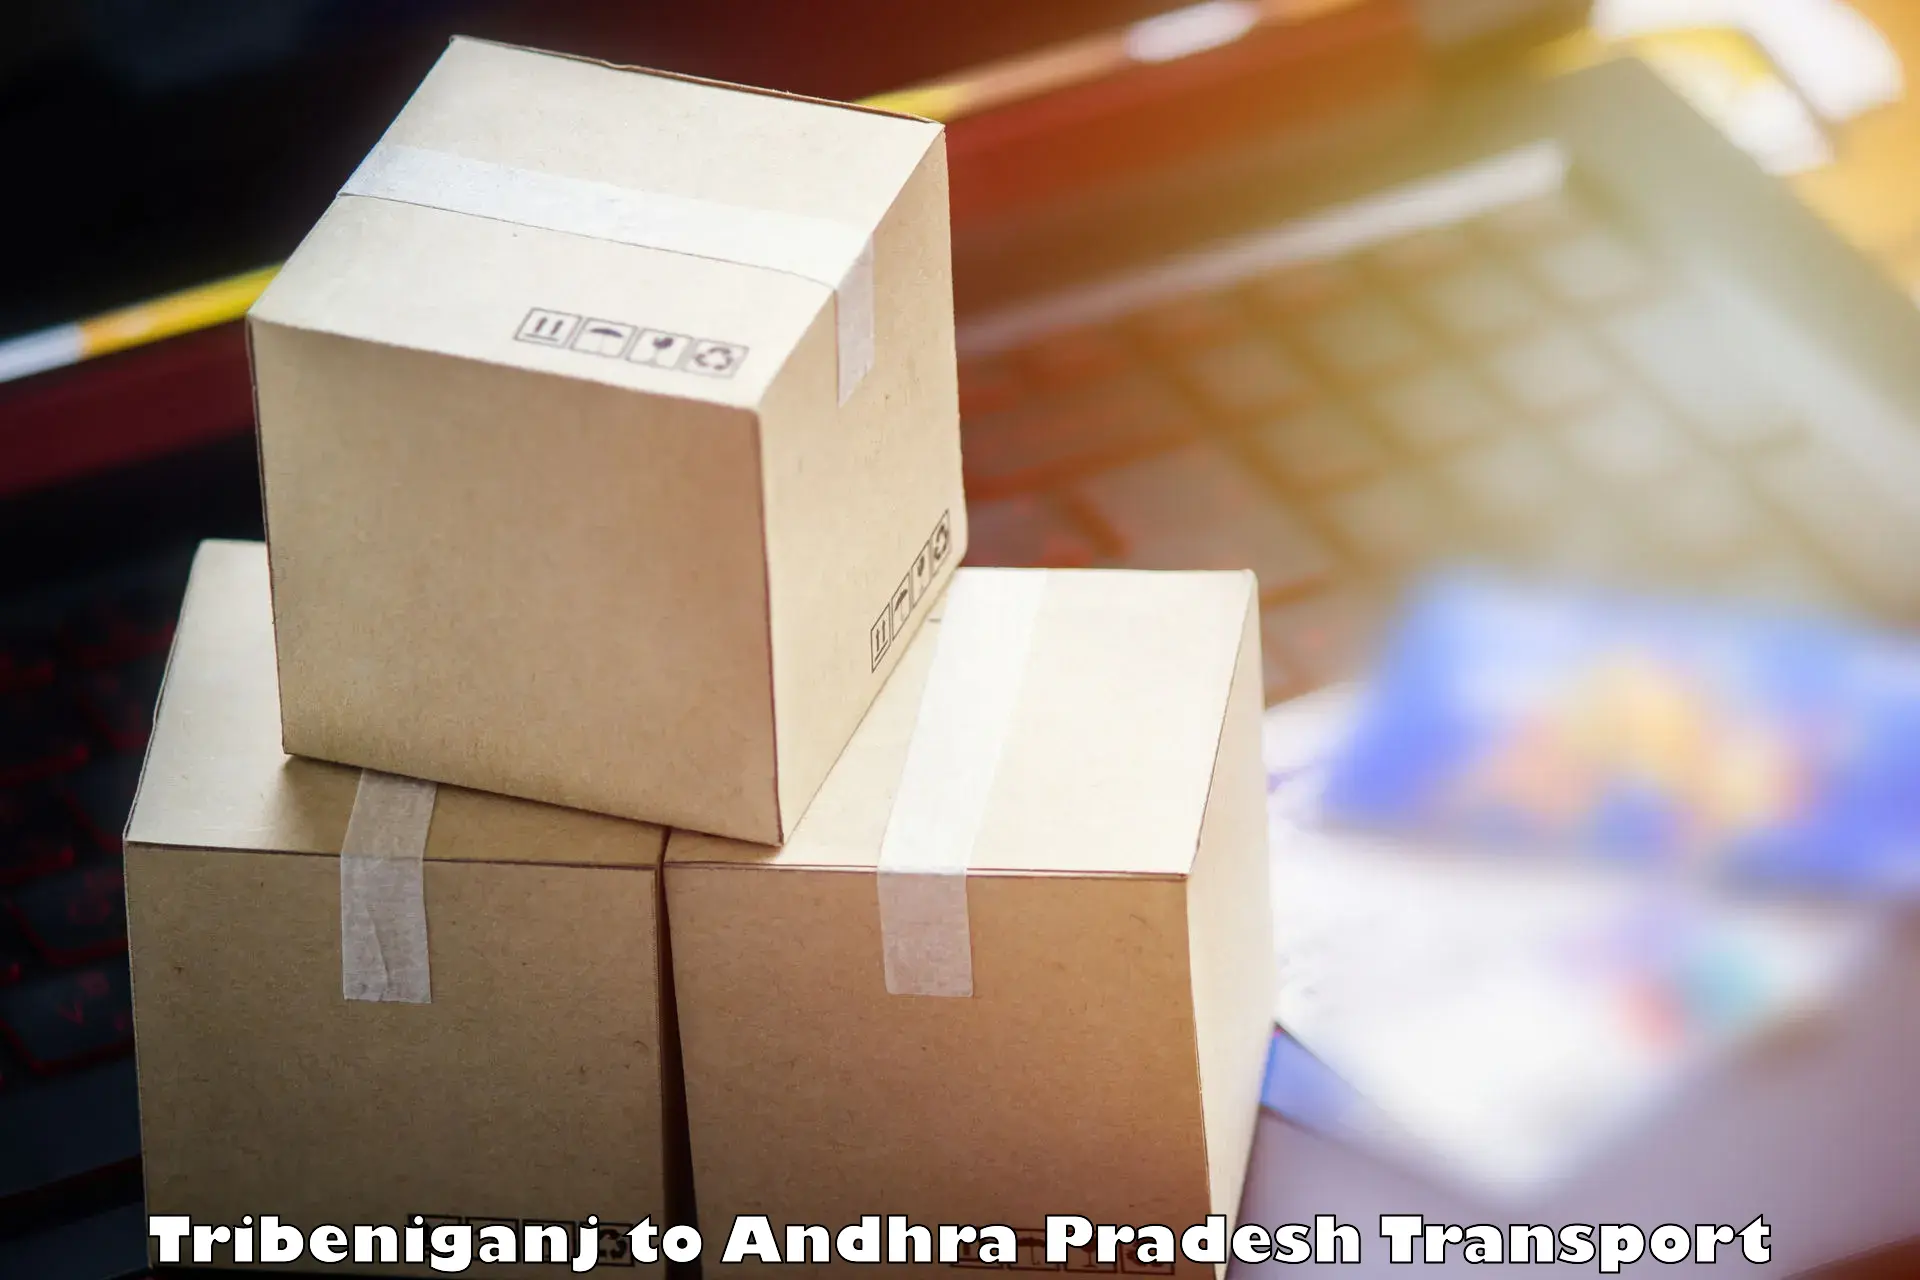 Air freight transport services Tribeniganj to Pulivendula